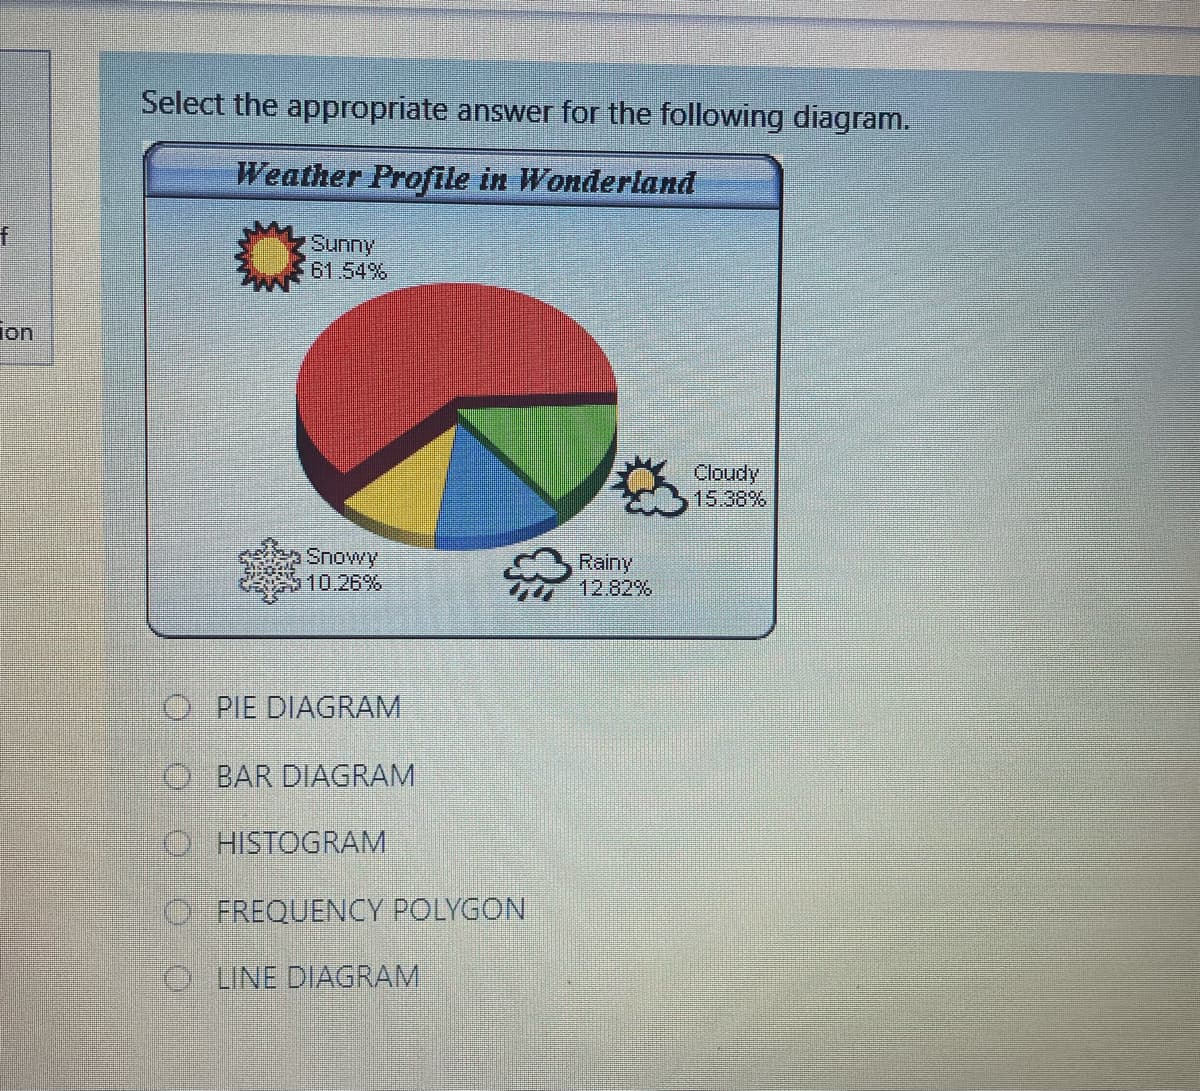 Select the appropriate answer for the following diagram.
Weather Profile in Wonderland
Sunny
61.54%
ion
Cloudy
15.38%
Snowy
10.26%
Rainy
12.82%
O PIE DIAGRAM
O BAR DIAGRAM
O HISTOGRAM
O FREQUENCY POLYGON
OLINE DIAGRAM
